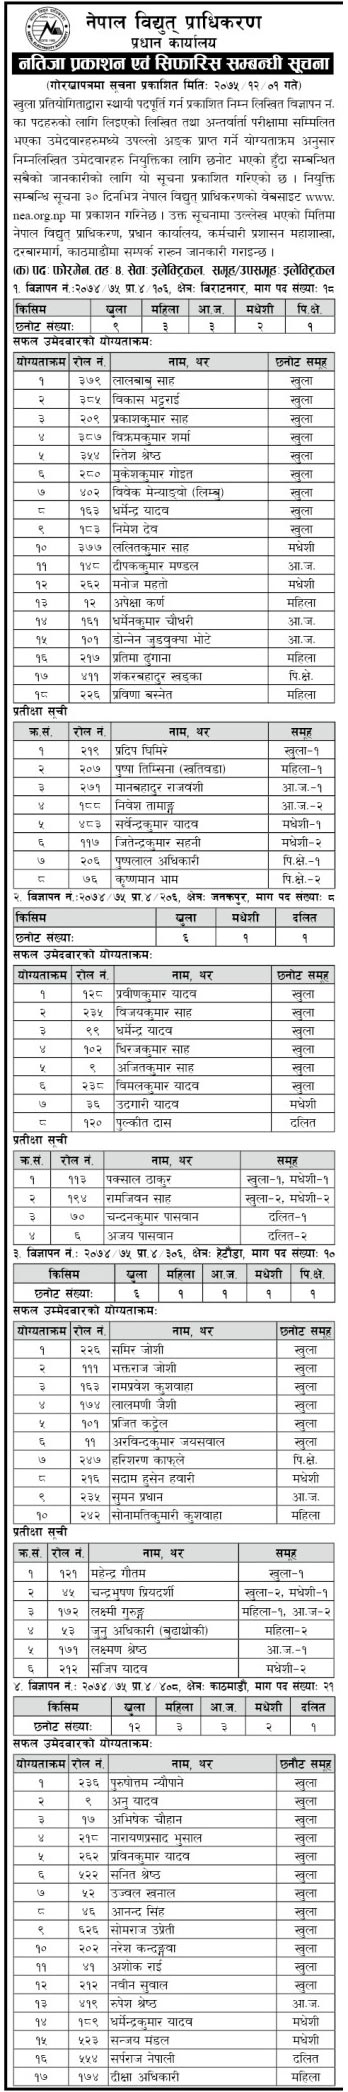 Nepal Electricity Authority Published Result Notice